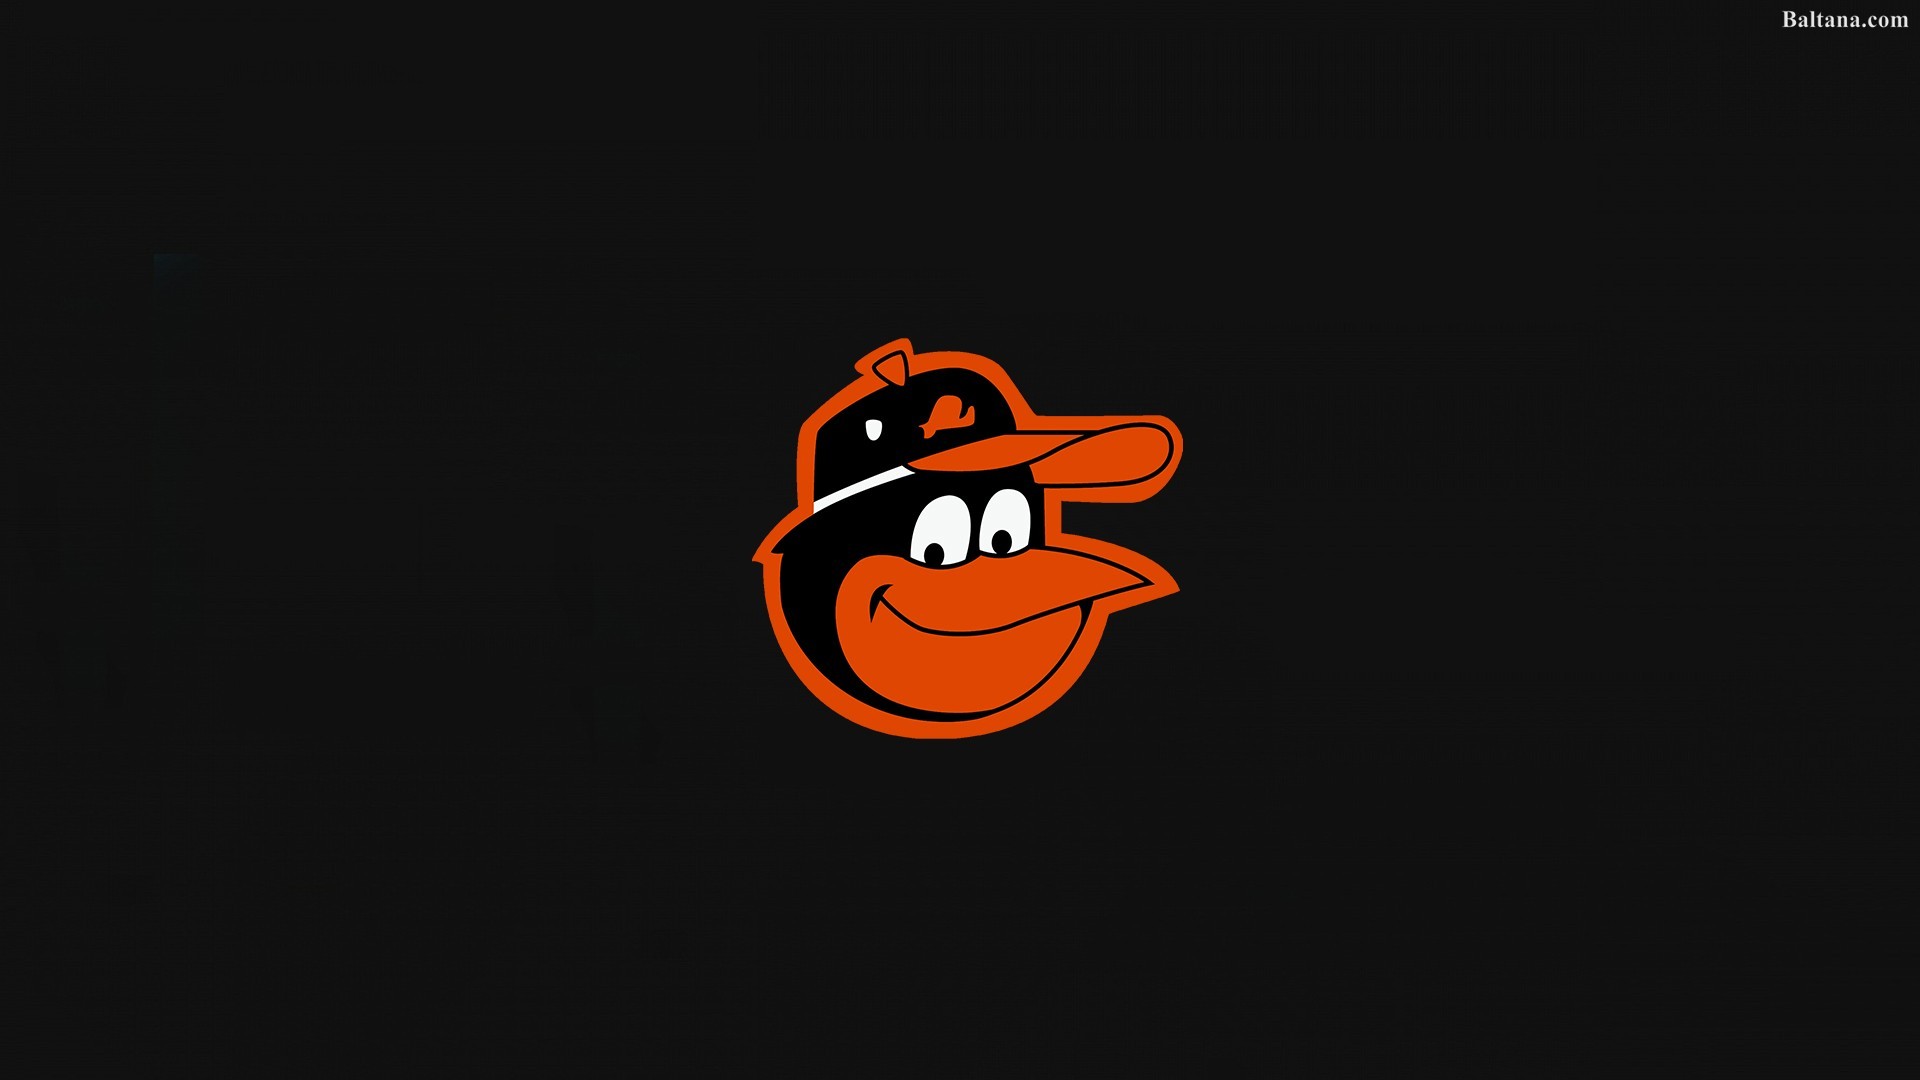 Baltimore Orioles Backgrounds HD With high-resolution 1920X1080 pixel. You can use this wallpaper for Mac Desktop Wallpaper, Laptop Screensavers, Android Wallpapers, Tablet or iPhone Home Screen and another mobile phone device